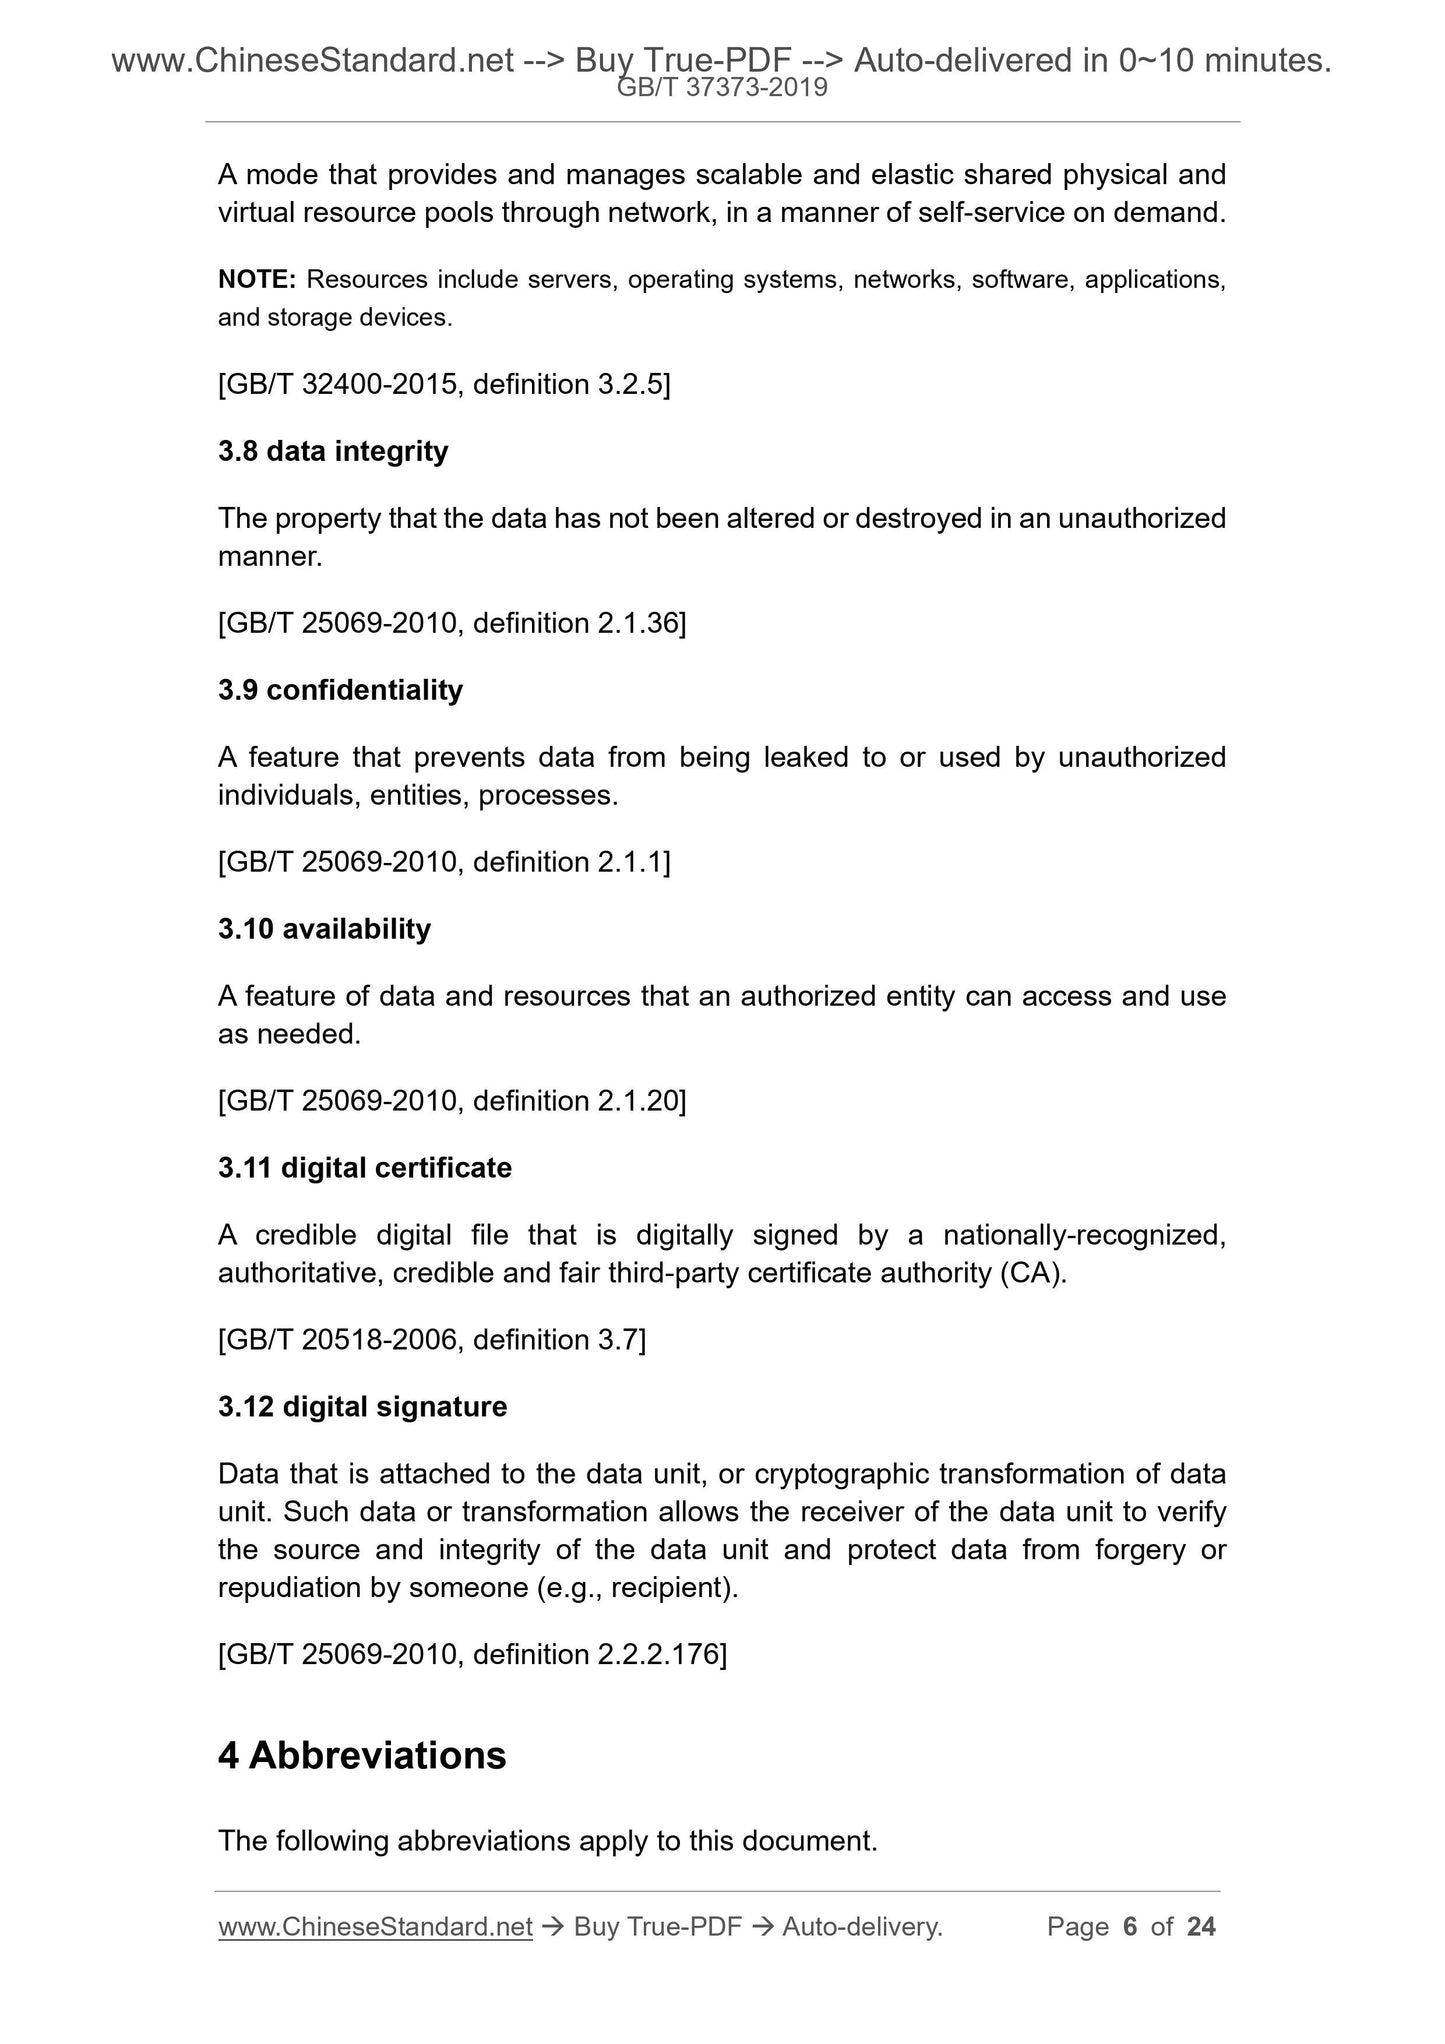 GB/T 37373-2019 Page 4